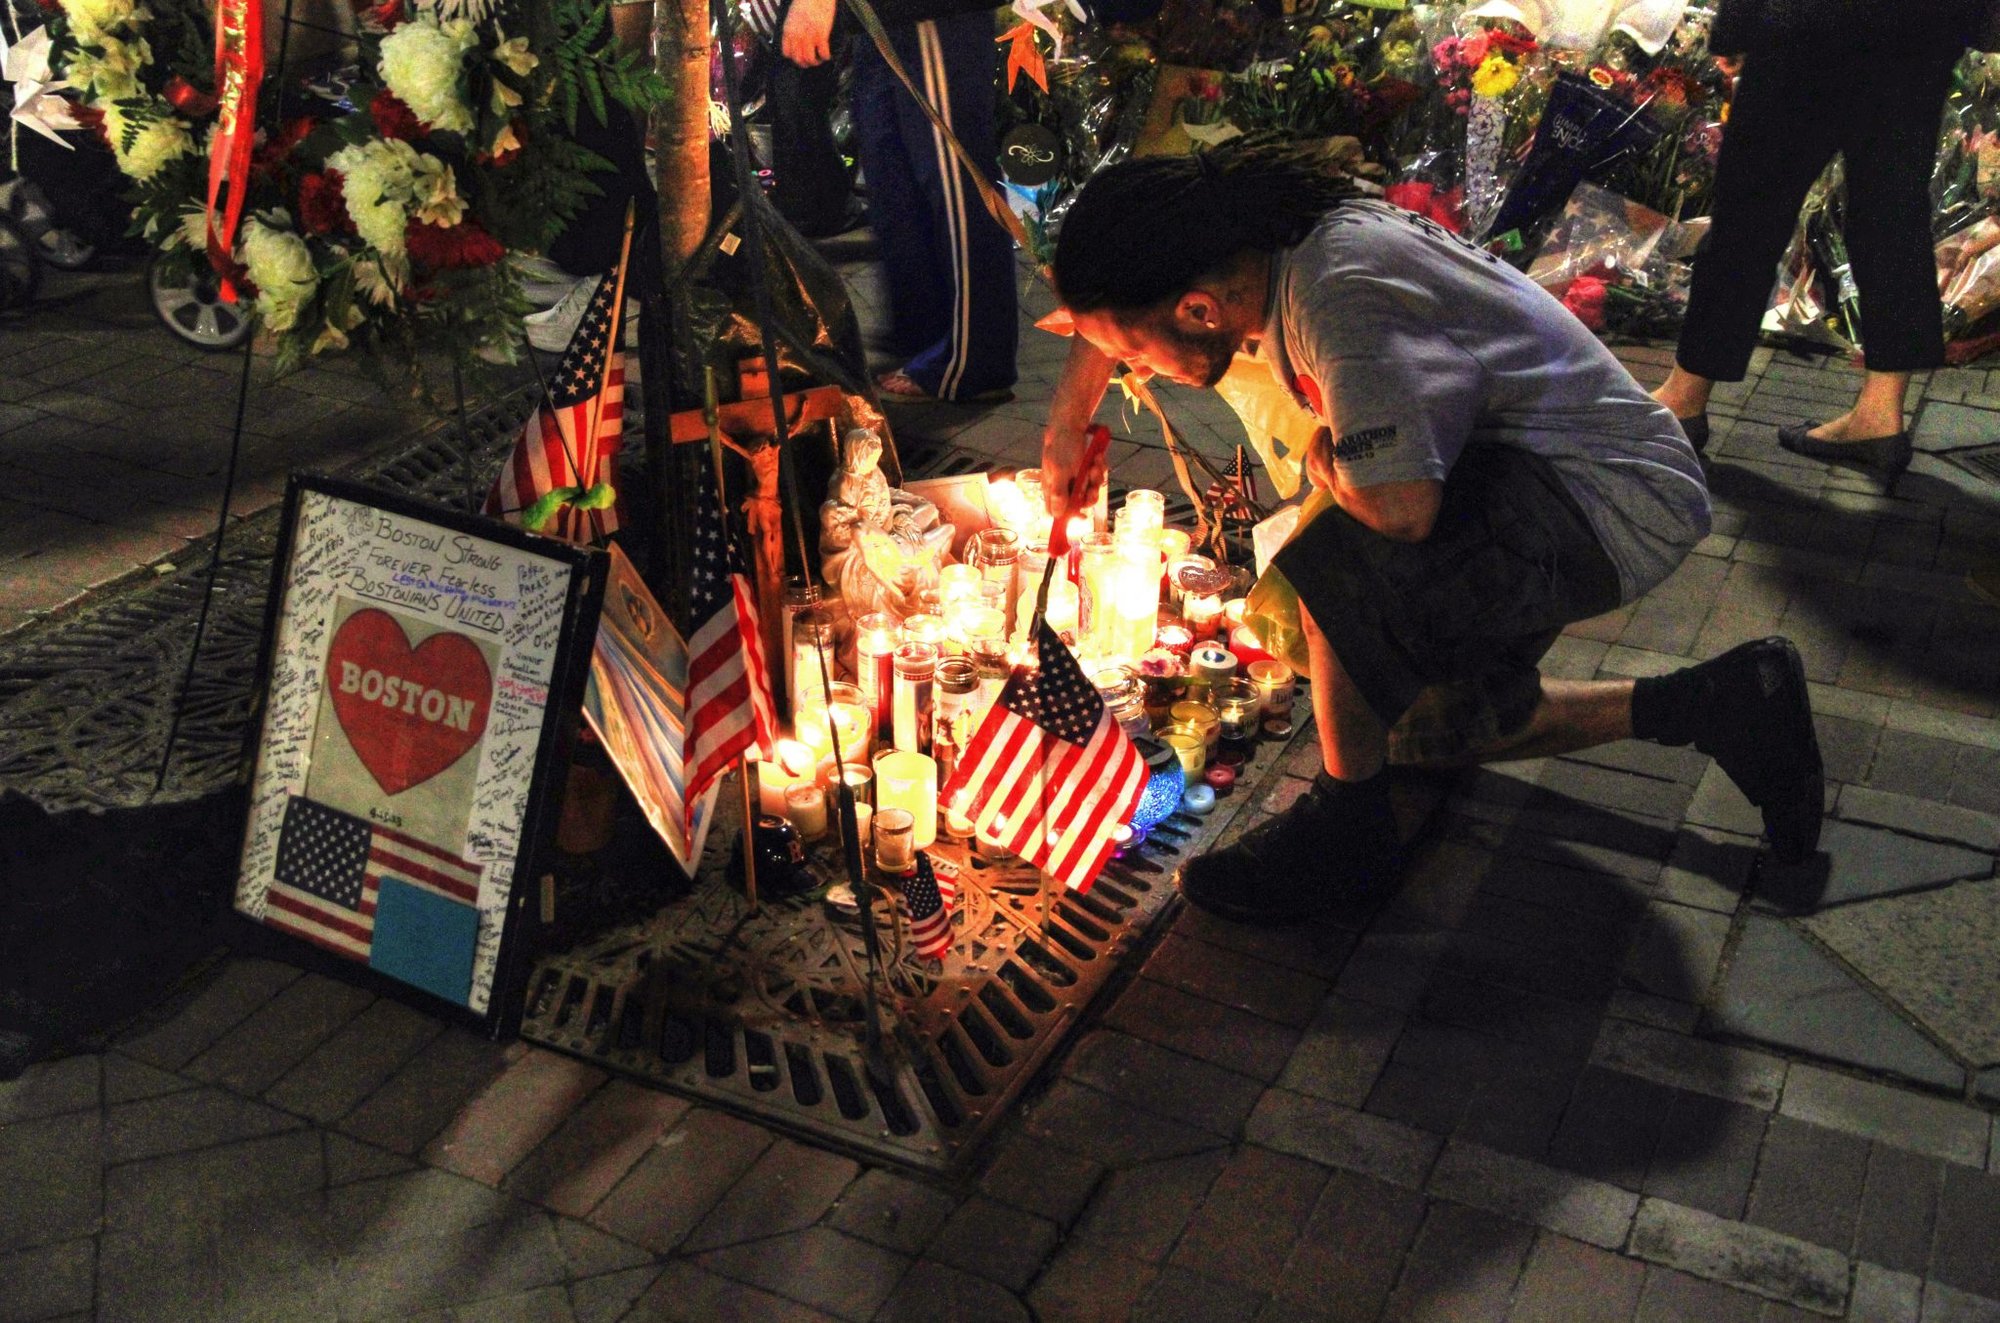 Remembering the victims of the Boston Marathon bombings in Copley Square of Boston, Massachusetts on July 30, 2013. Photo by Ingfbruno via Wikimedia Commons.